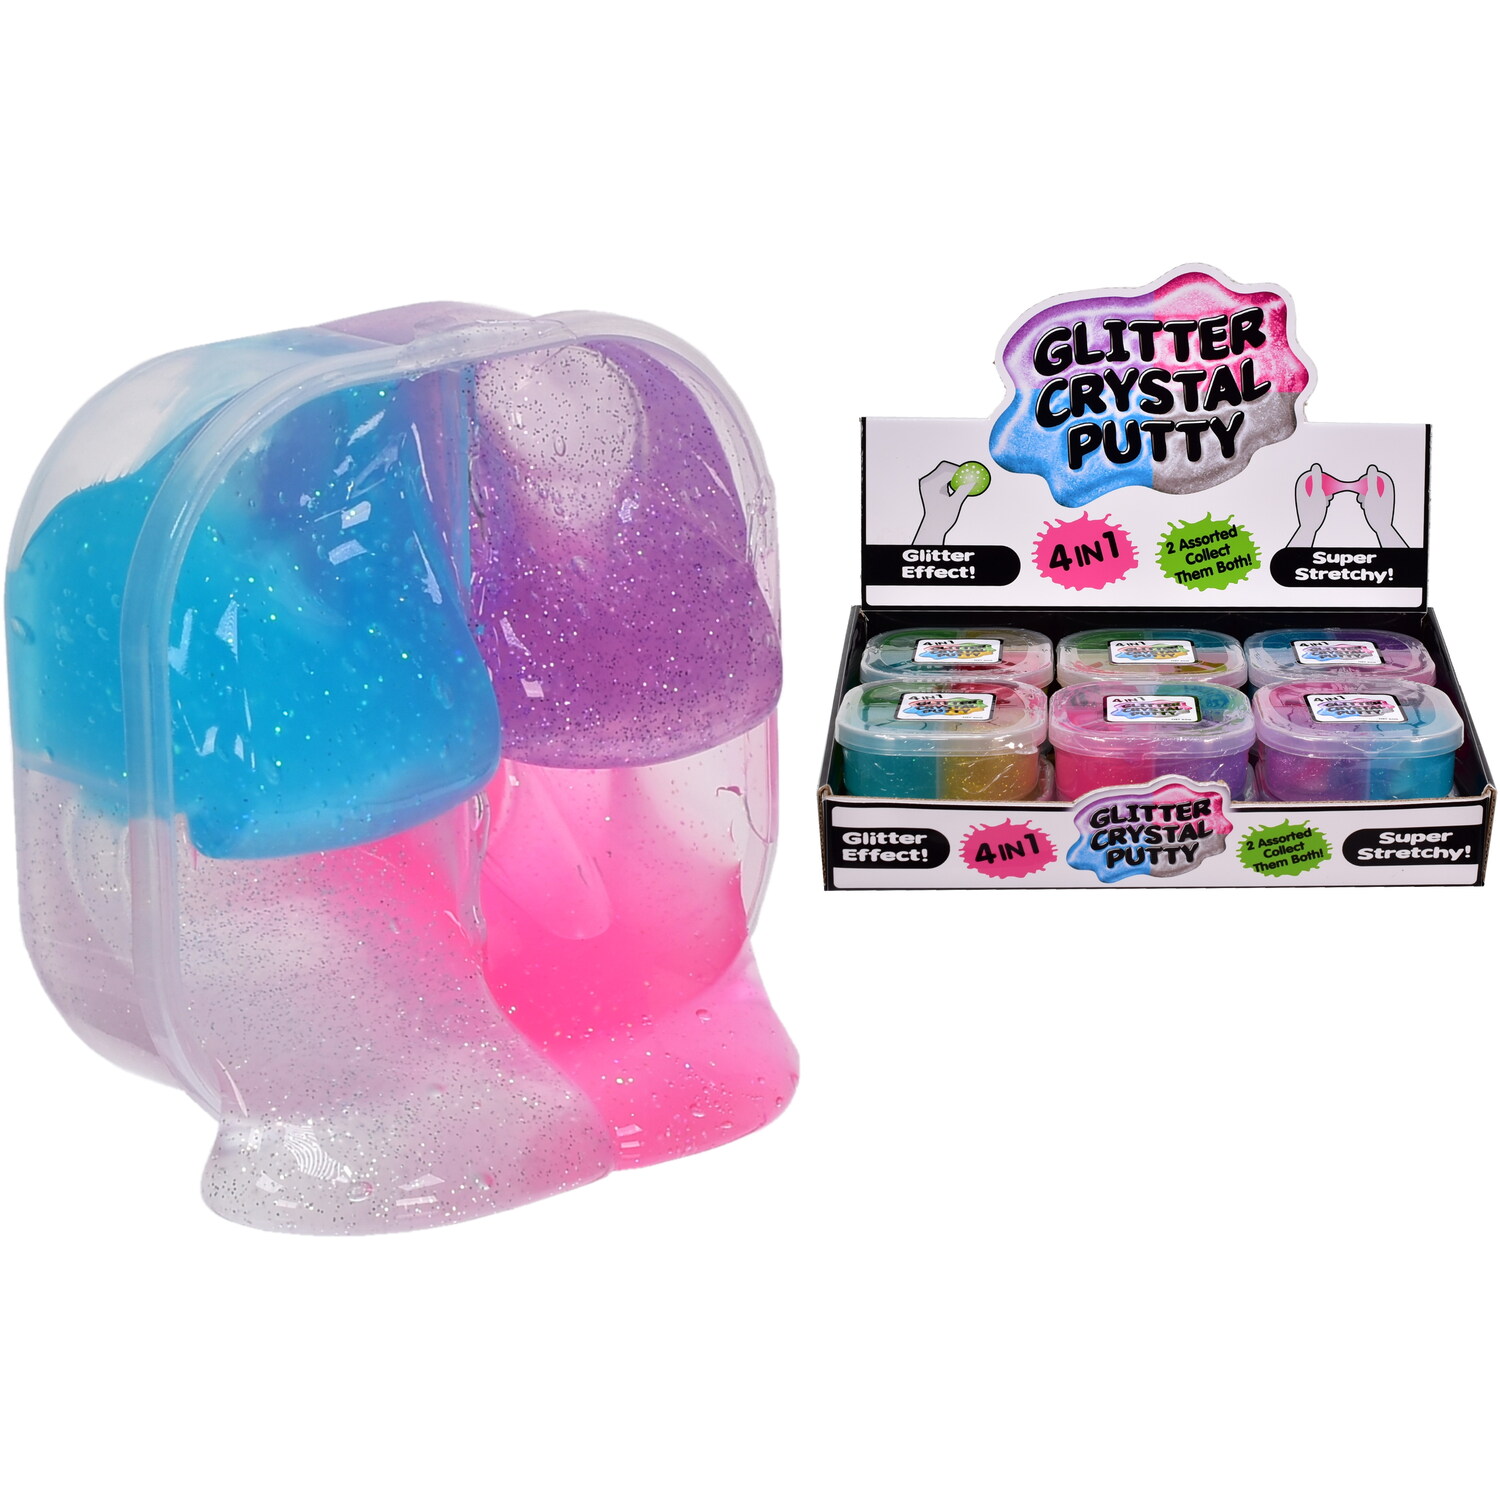 4-in-1 Crystal Glitter Putty Image